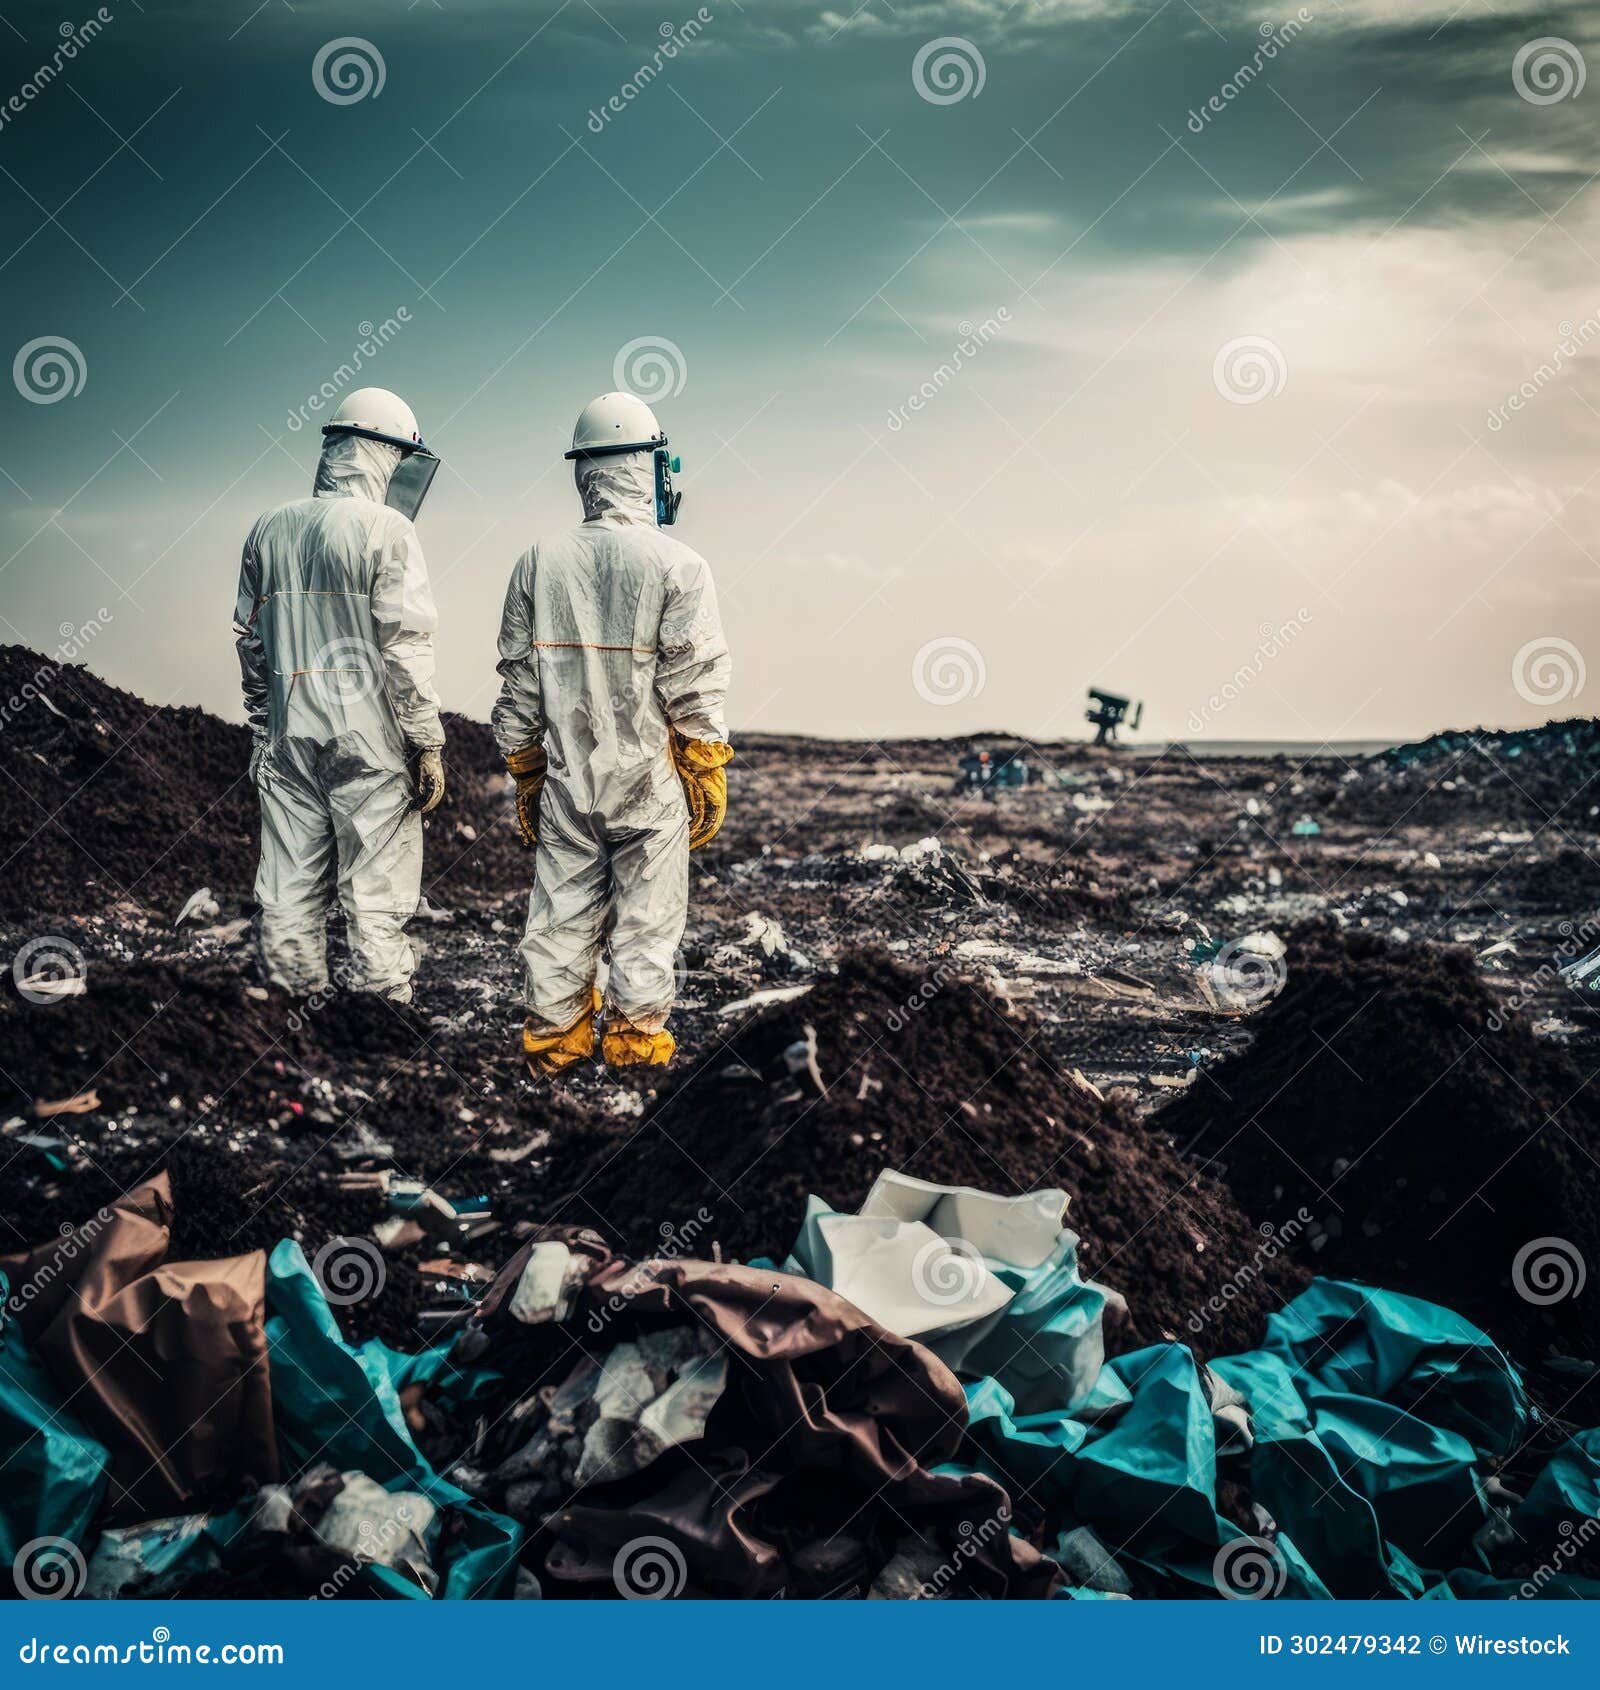 scientists - workers in chemicals protective suits investigate waste collectors with toxic chemicals